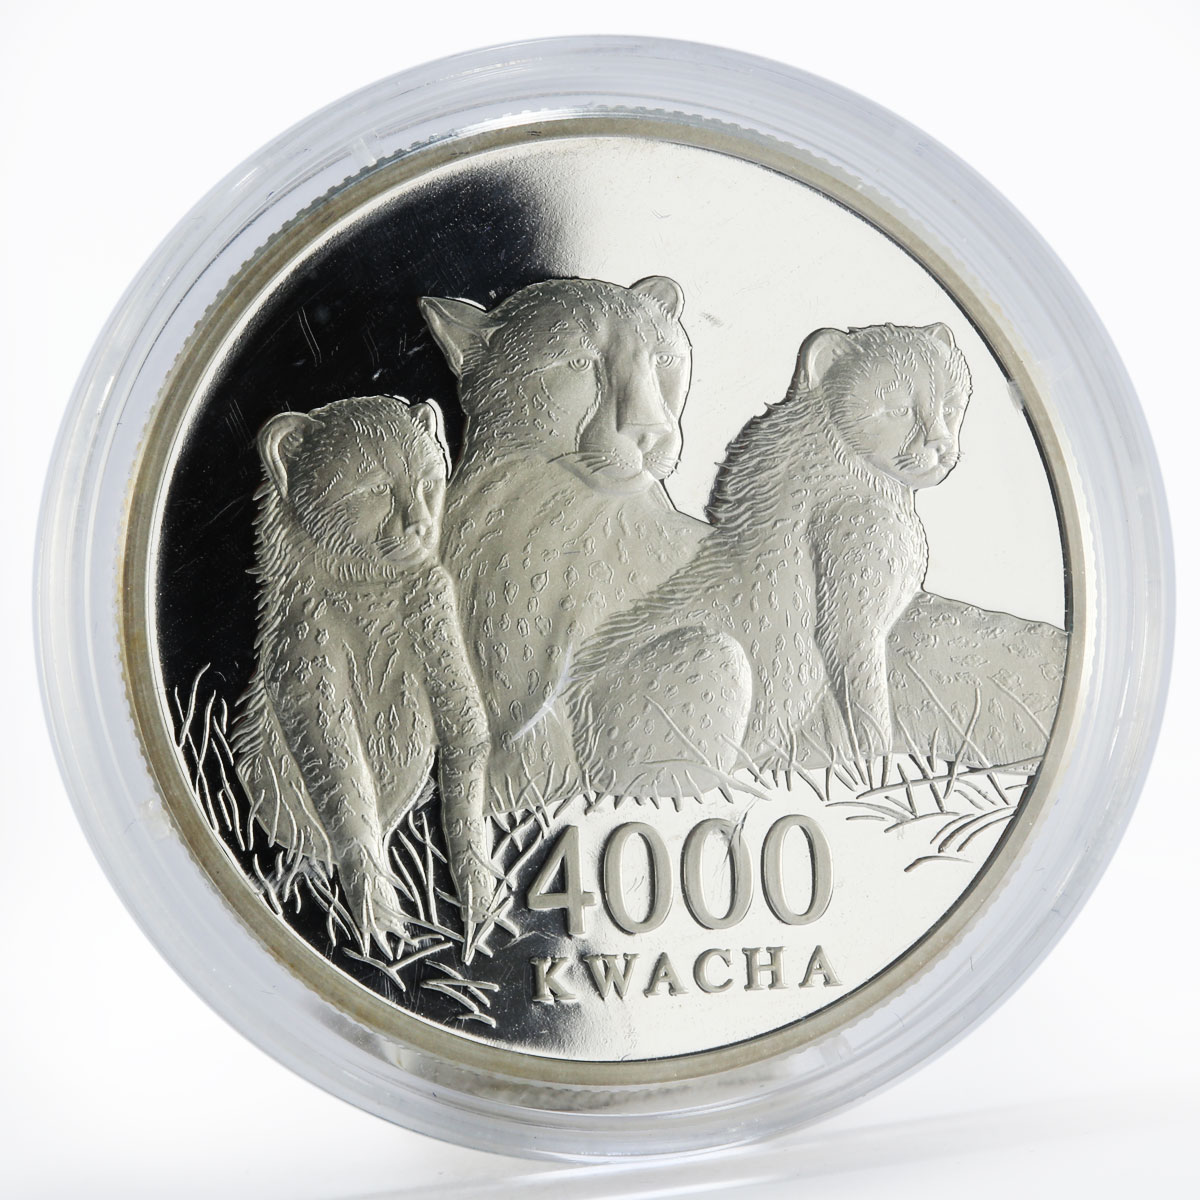 Zambia 4000 kwacha African Wildlife Leopard and two cubs proof silver coin 2000